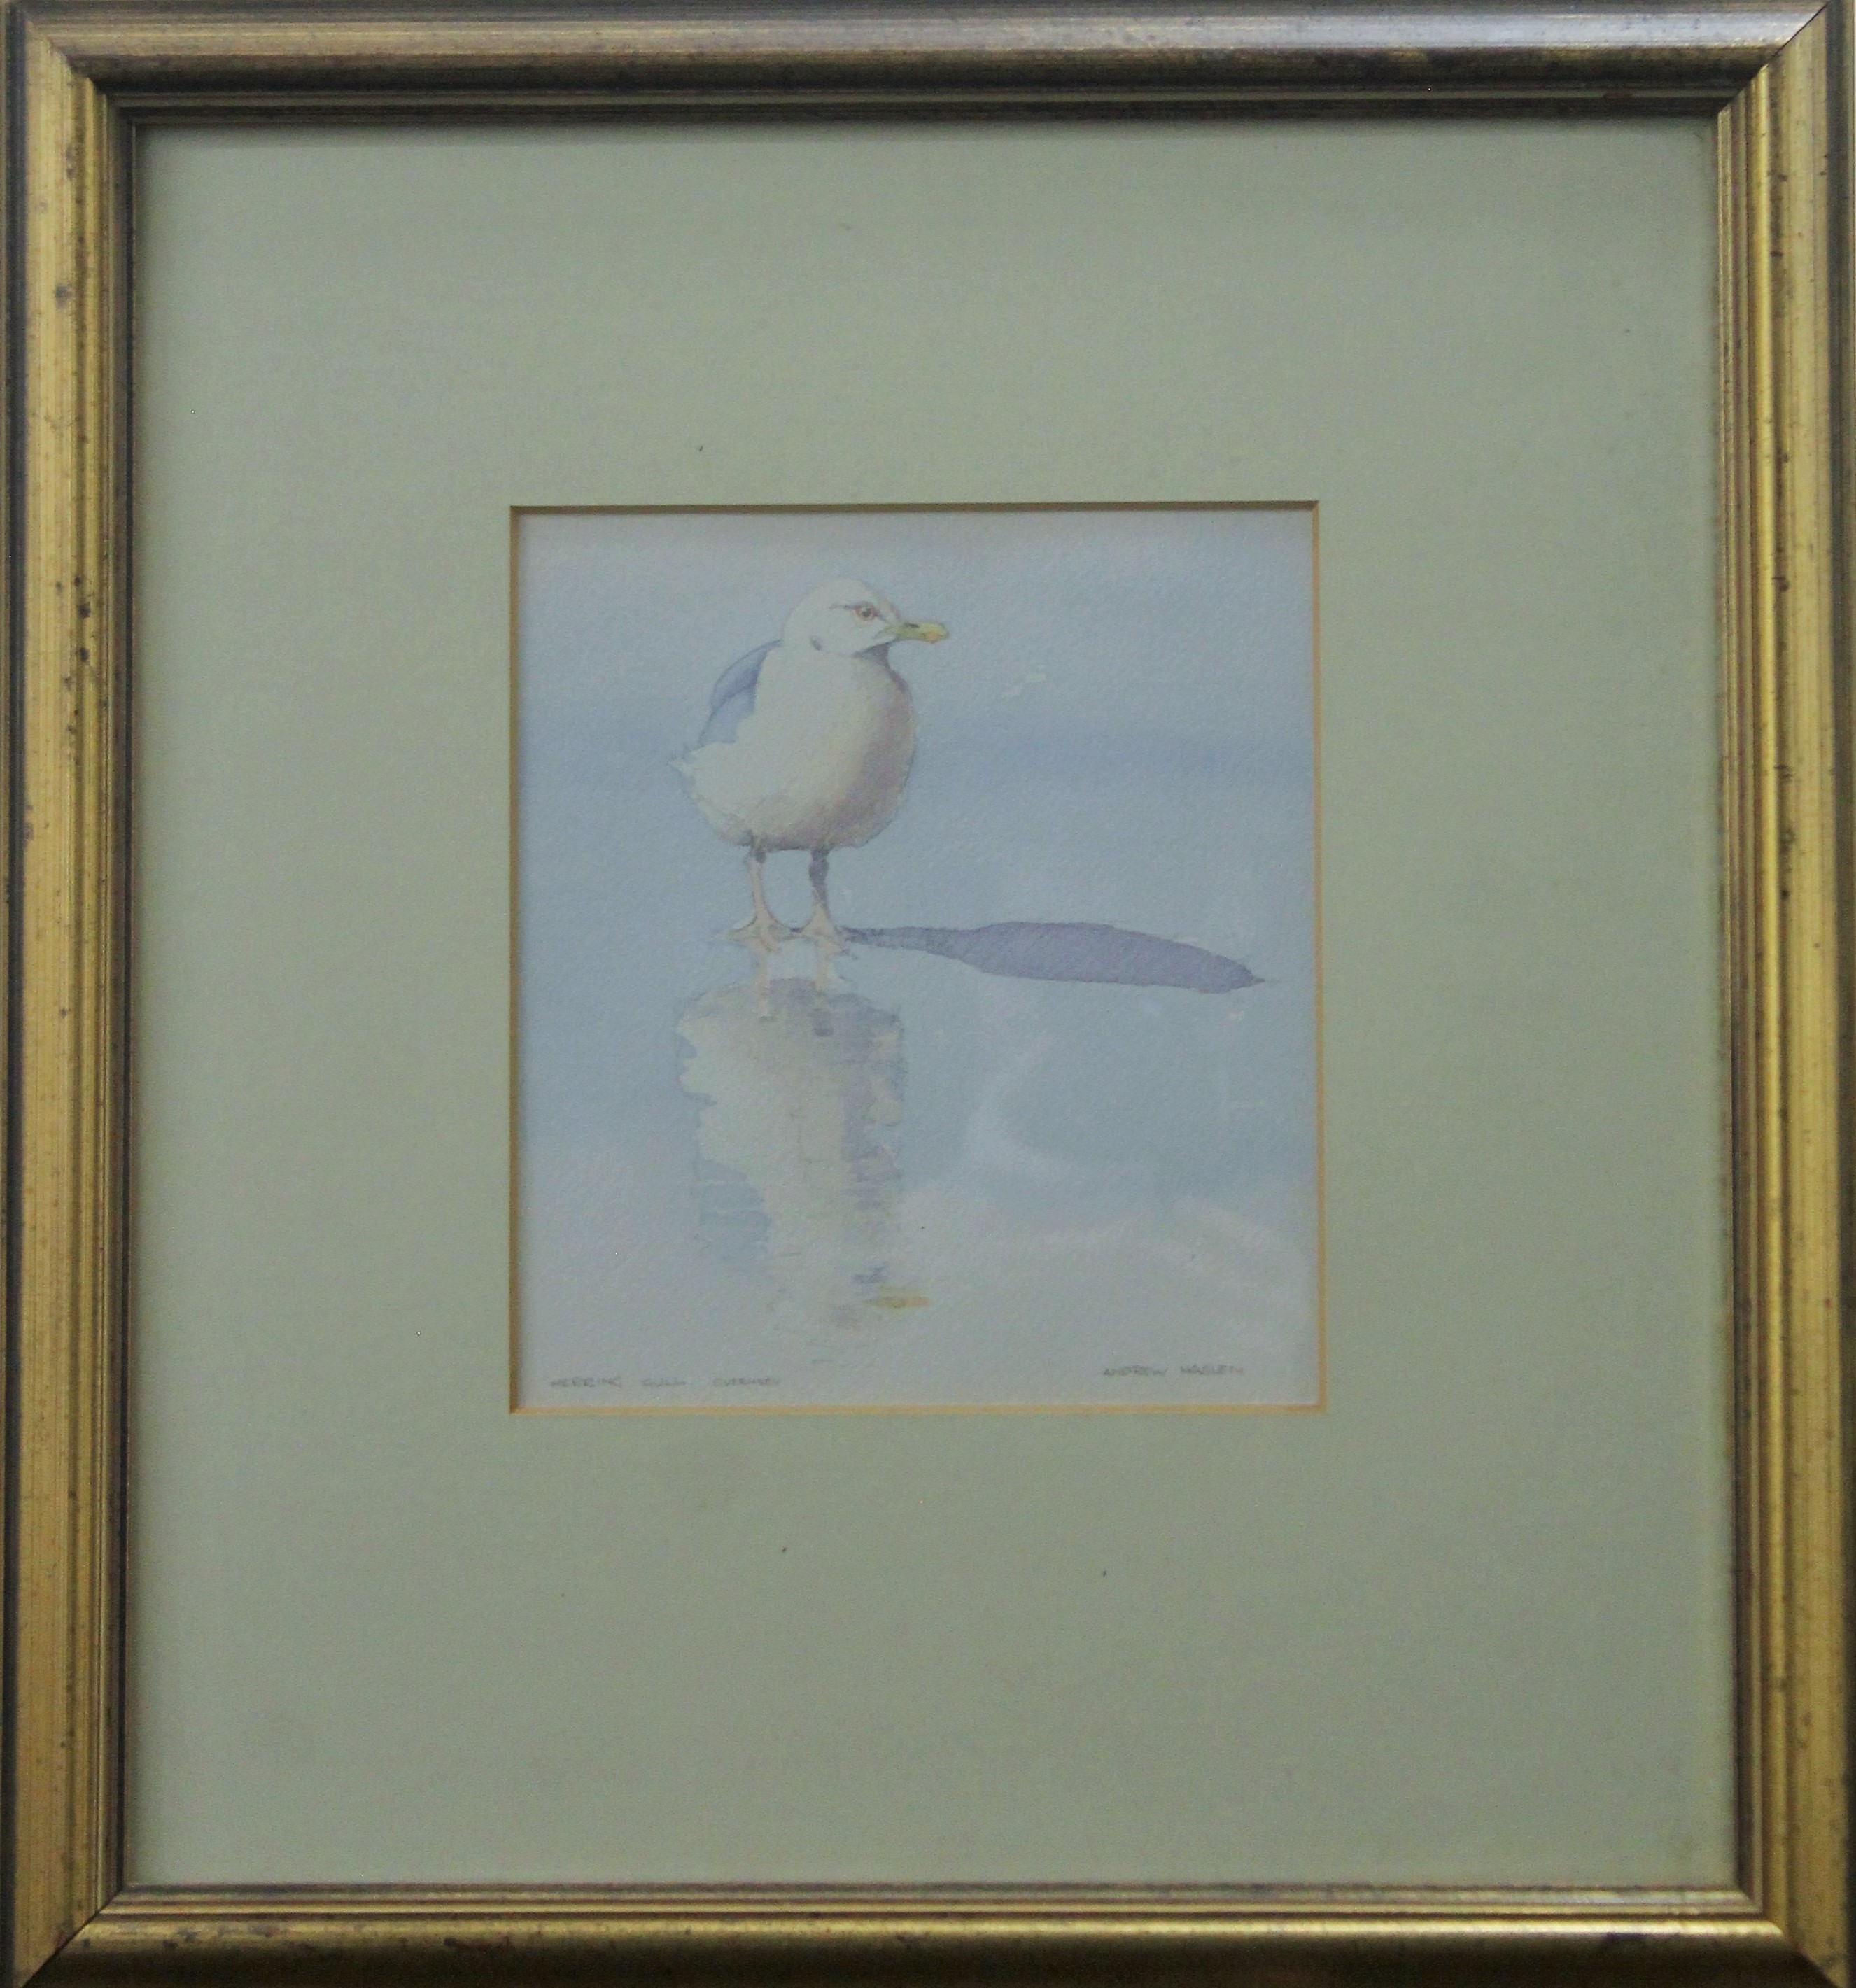 HASLEN, ANDREW (born 1951) British (AR), Herring Gull, Guernsey, watercolour, signed, - Image 2 of 3